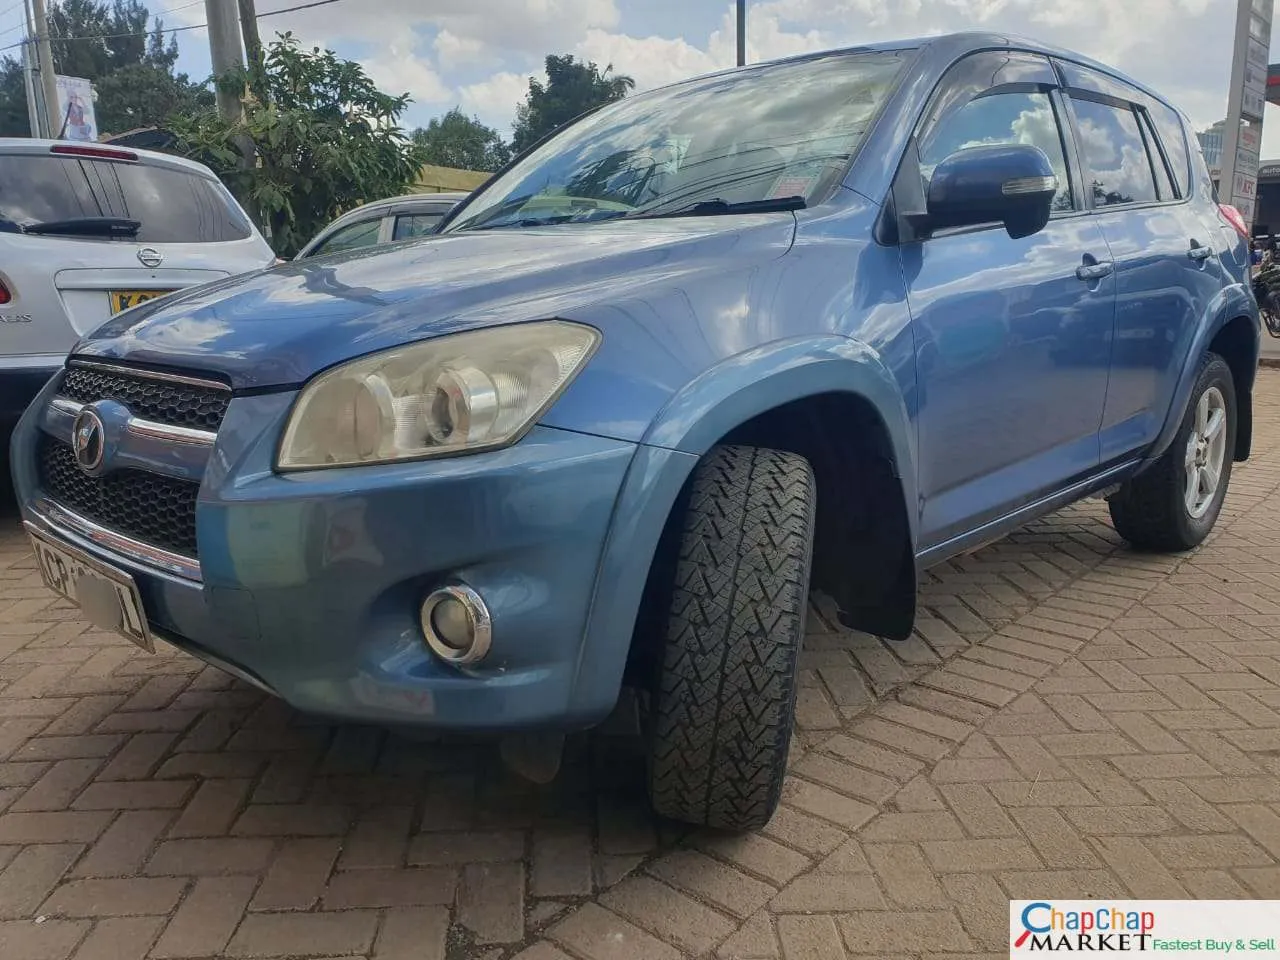 Toyota RAV4 Asian Owner CHEAPEST You Pay 30% Deposit Trade in OK EXCLUSIVE